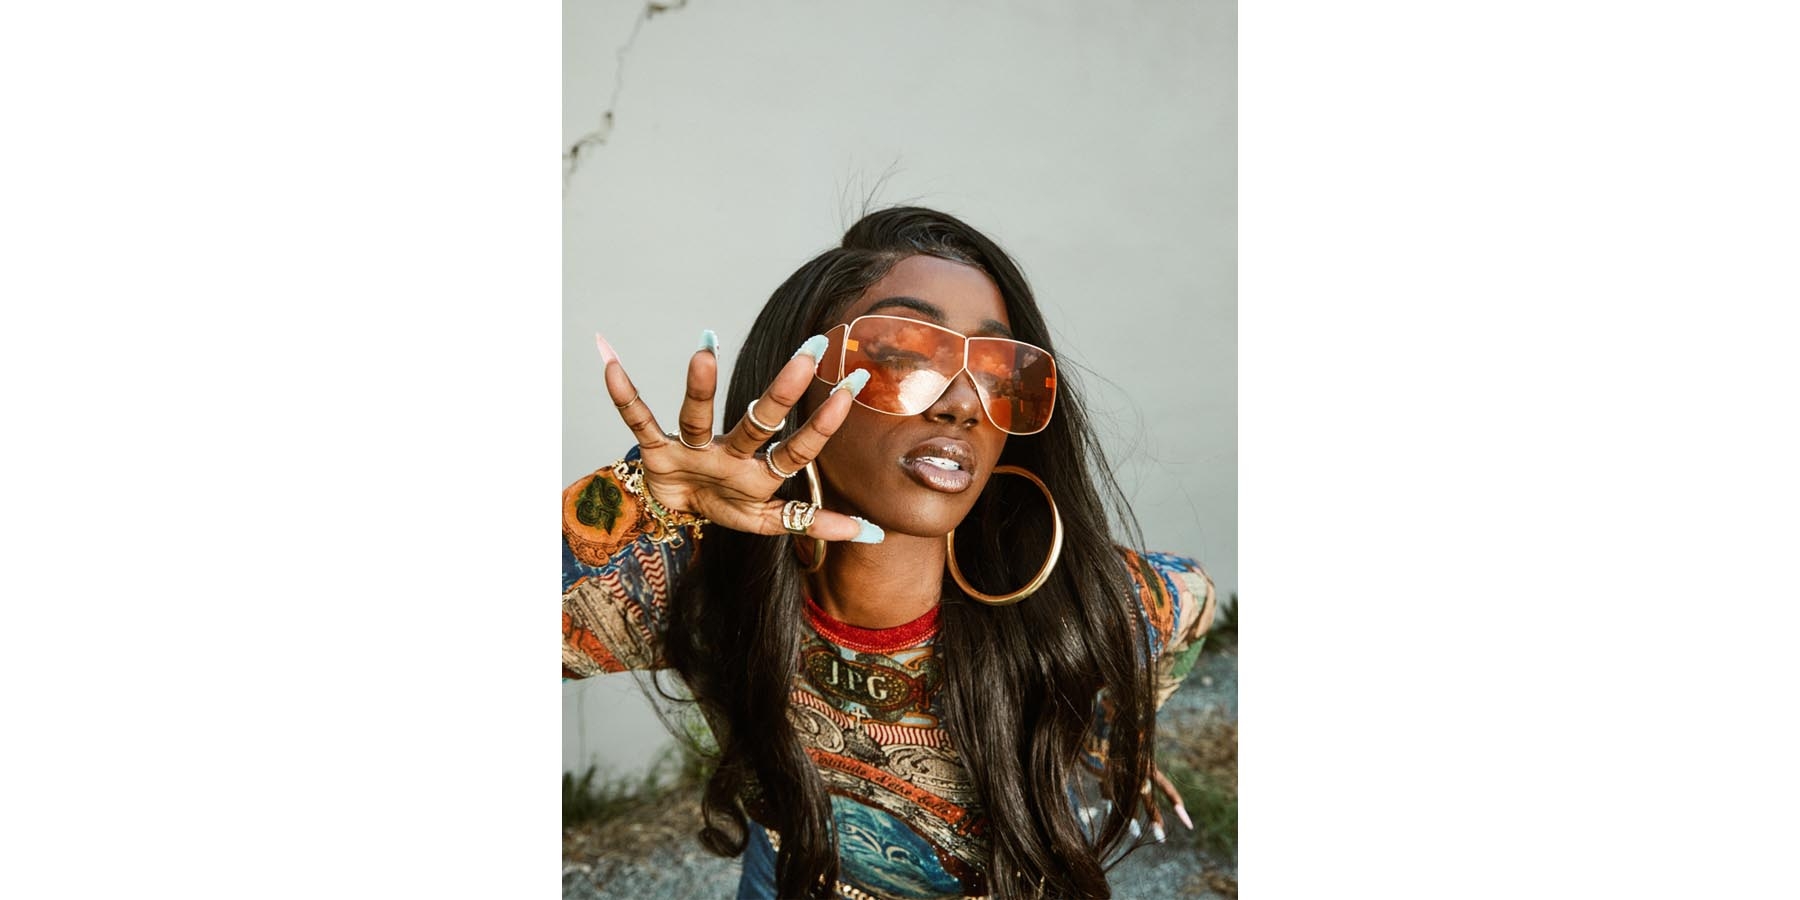 Flo Milli poses for the camera with distinctibve sunglasses and fingernails